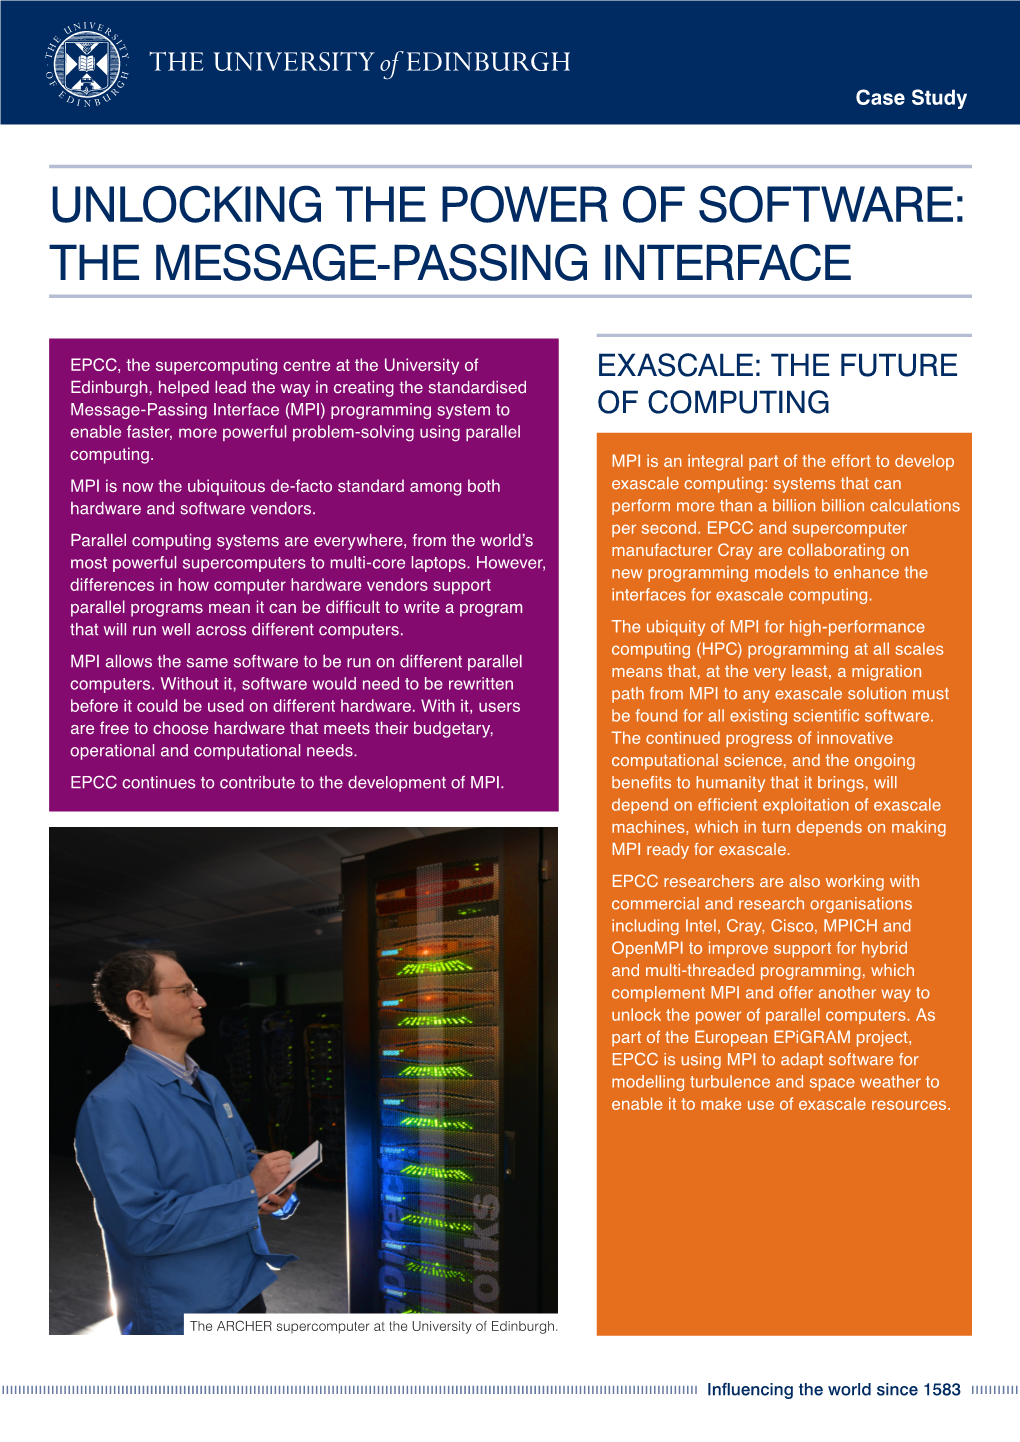 The Message-Passing Interface